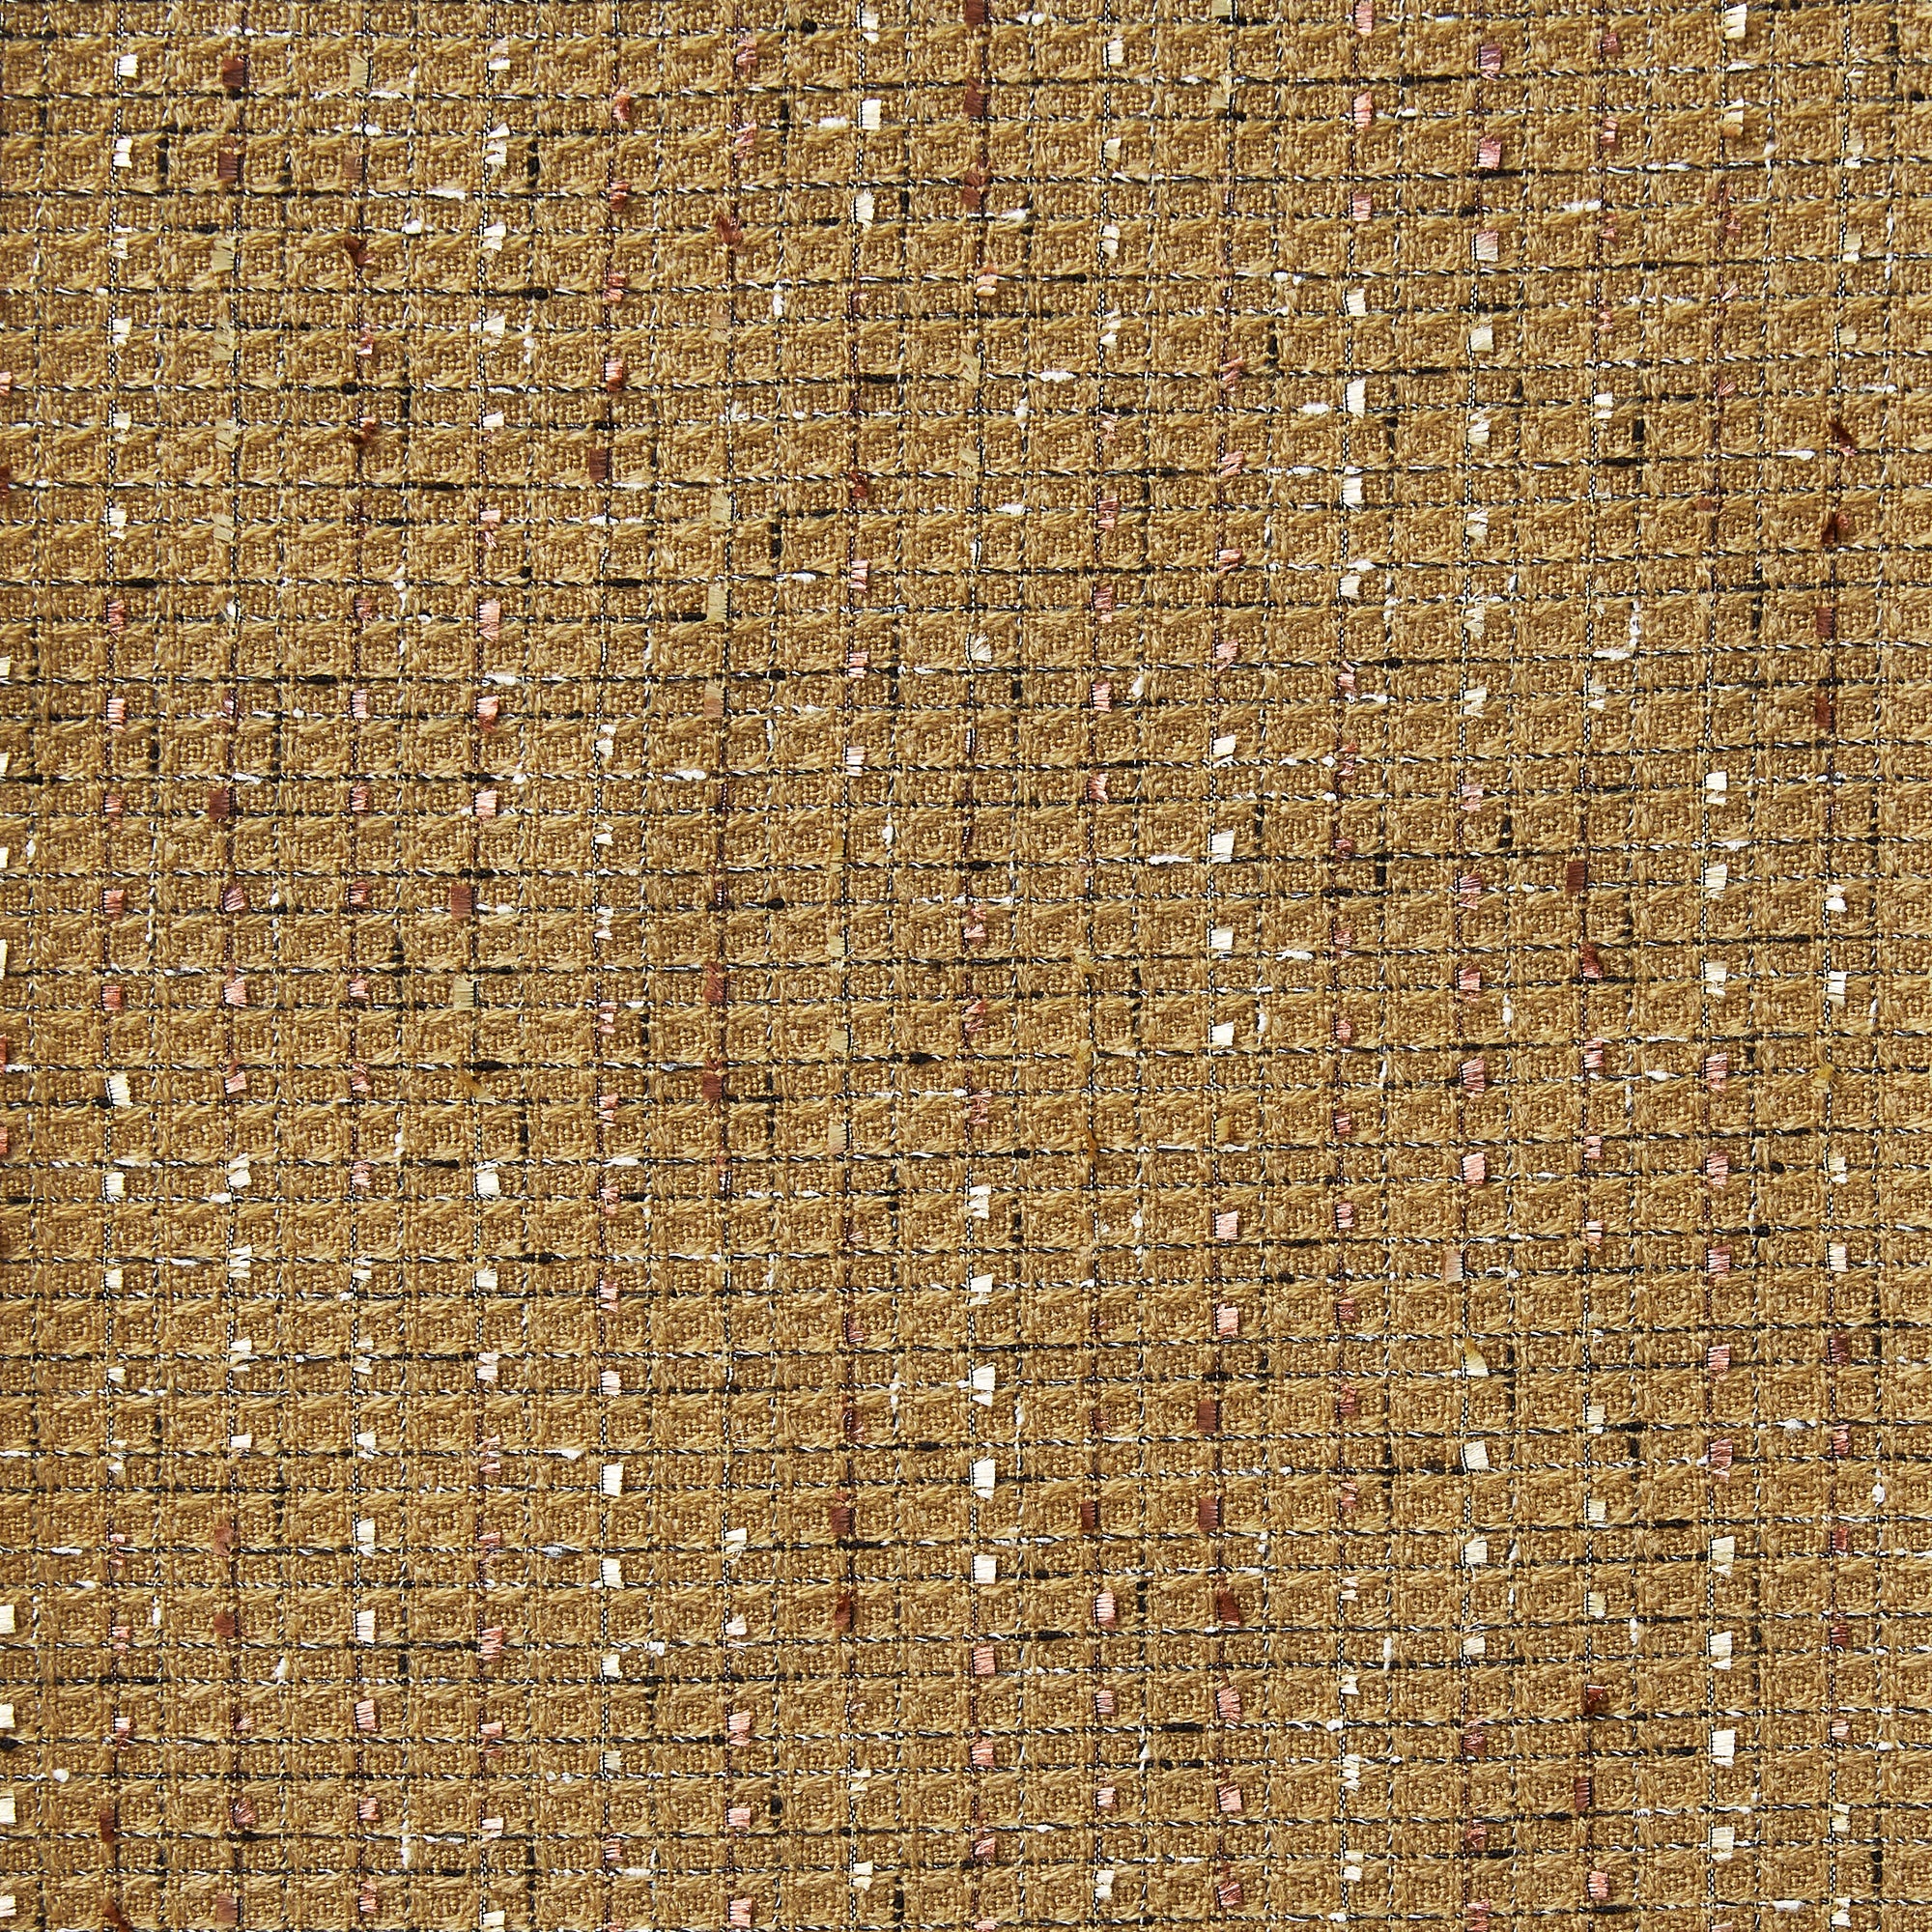 Eyelash presenting the camel  color woven yarn dyed tweed-like Acrylic  blend for suiting